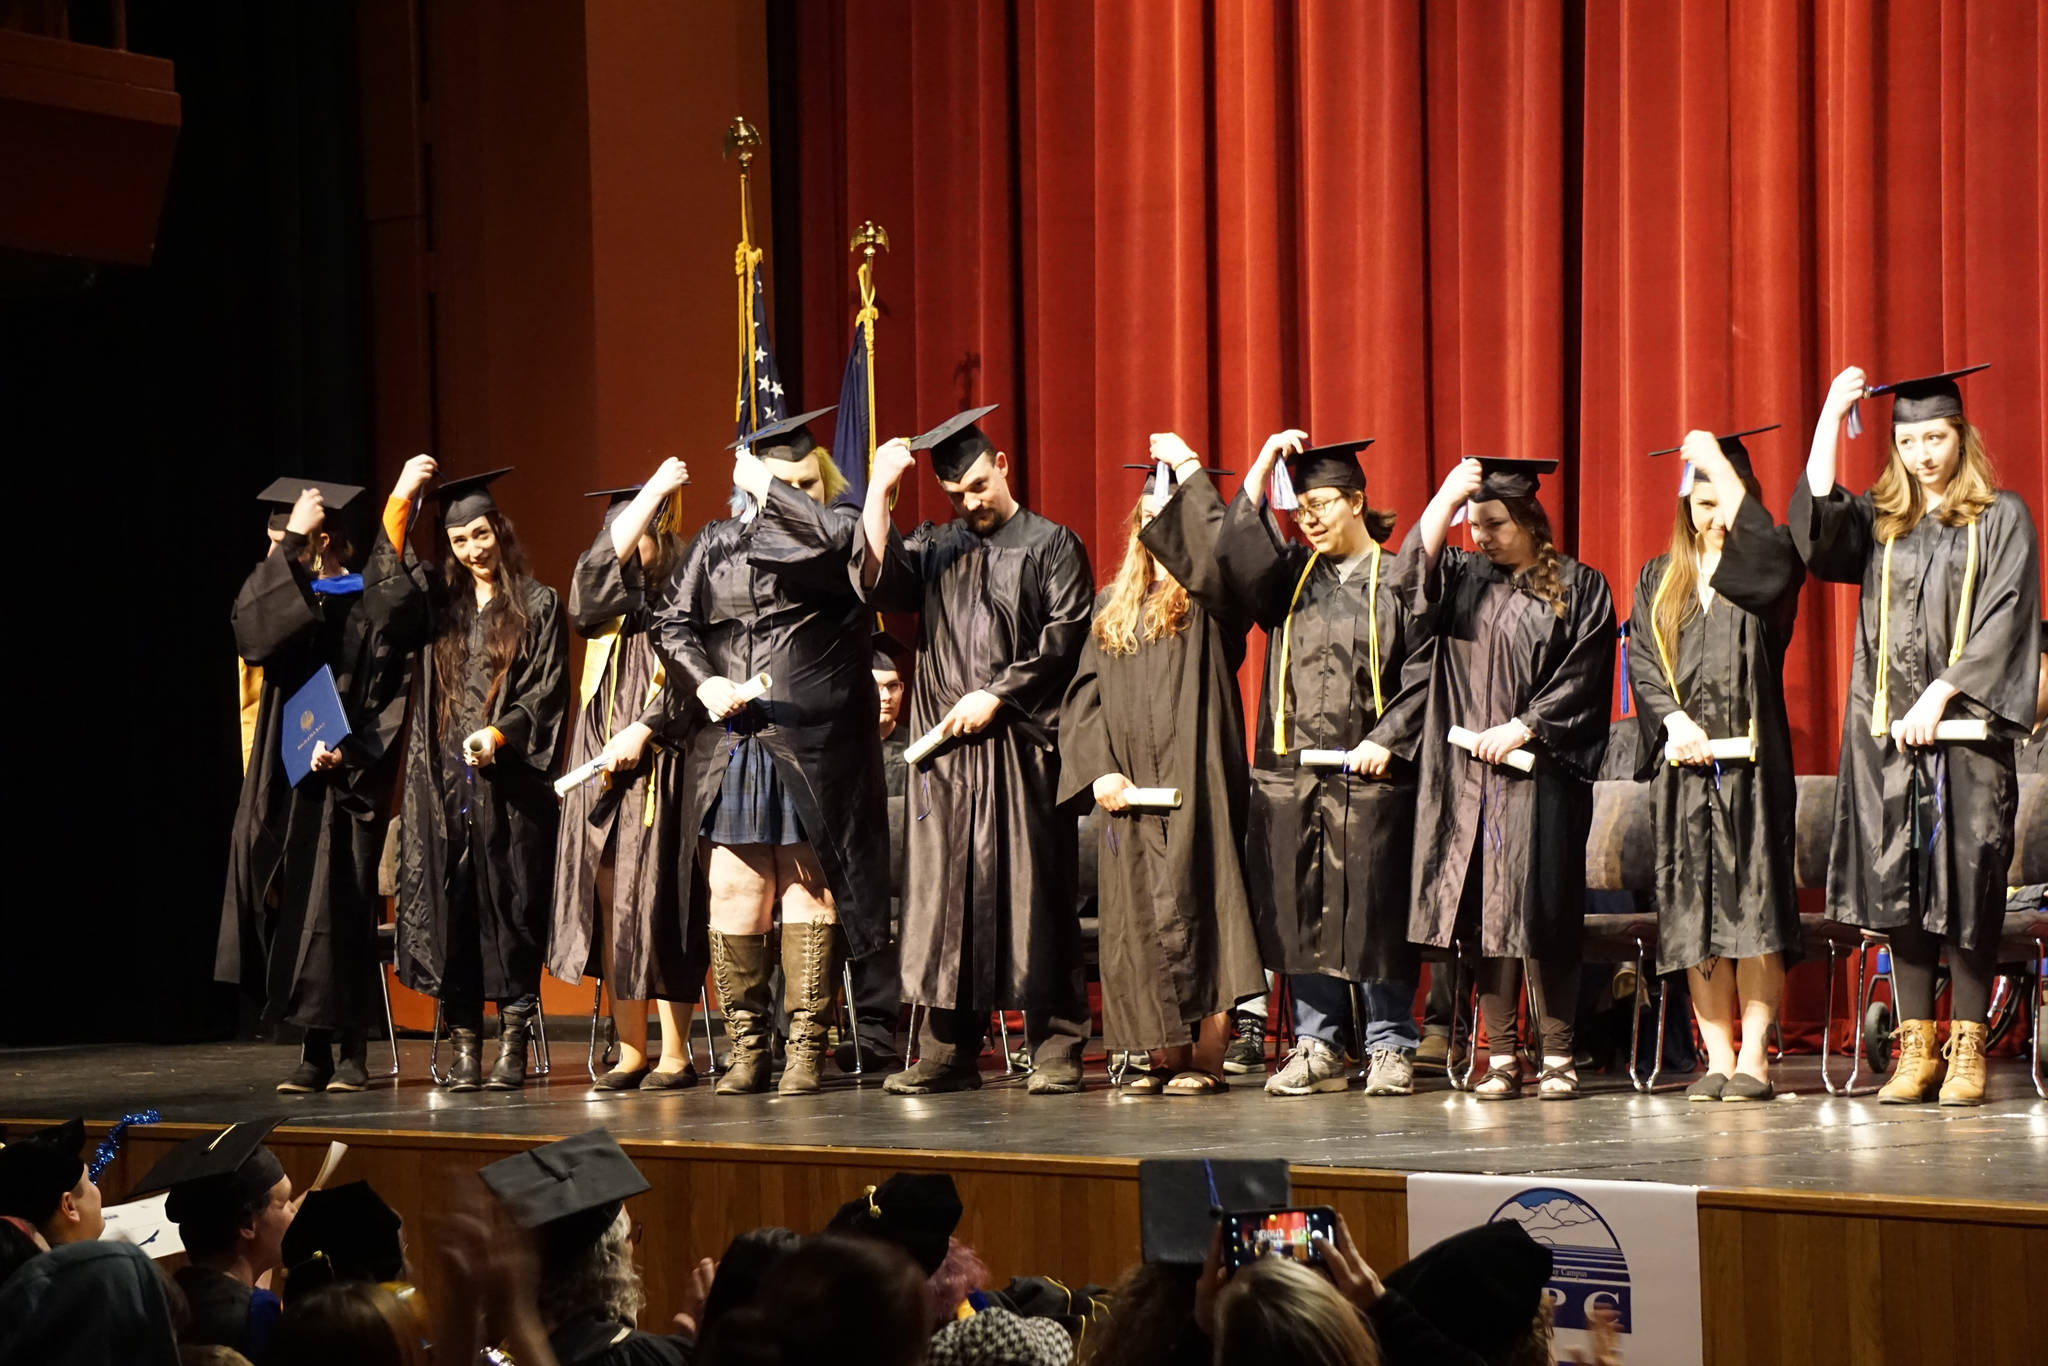 Graduates flip their tassels at the Kachemak Bay Campus commencement last Wednesday, May 8, 2019, at the Mariner Theatre in Homer, Alaska. (Photo by Michael Armstrong/Homer News.)